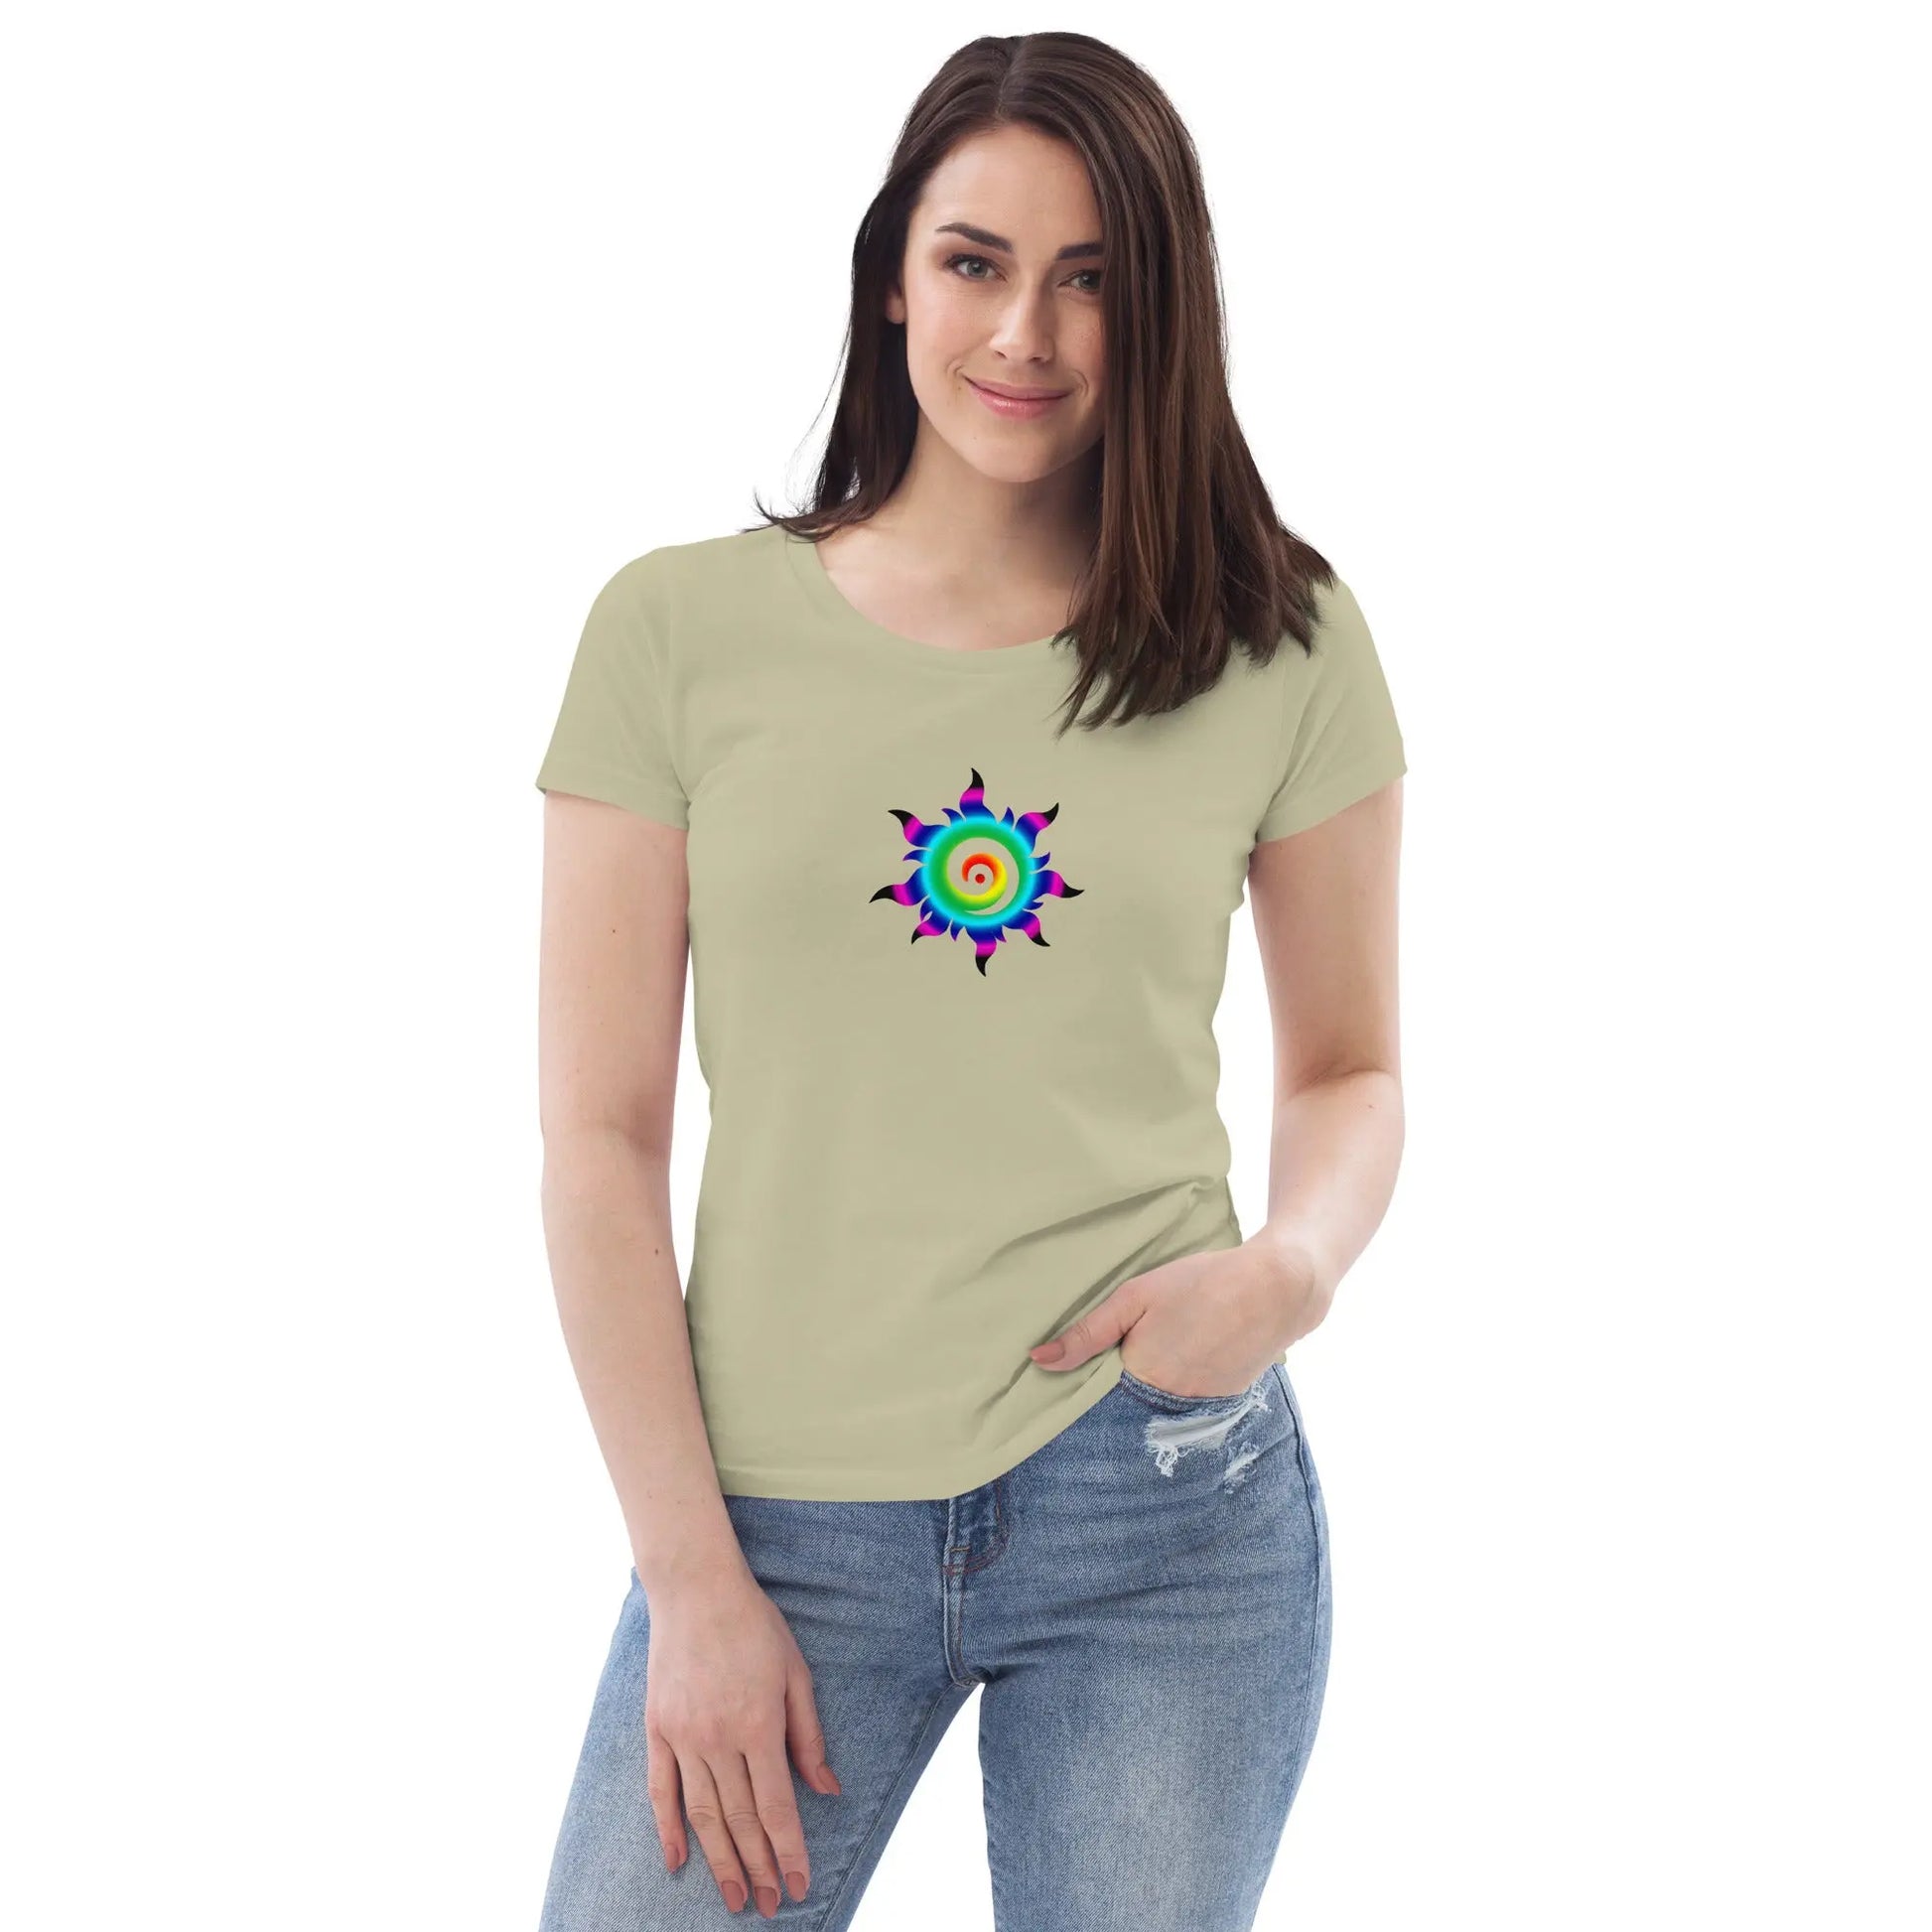 Women's fitted eco tee ActSunx - Image #13